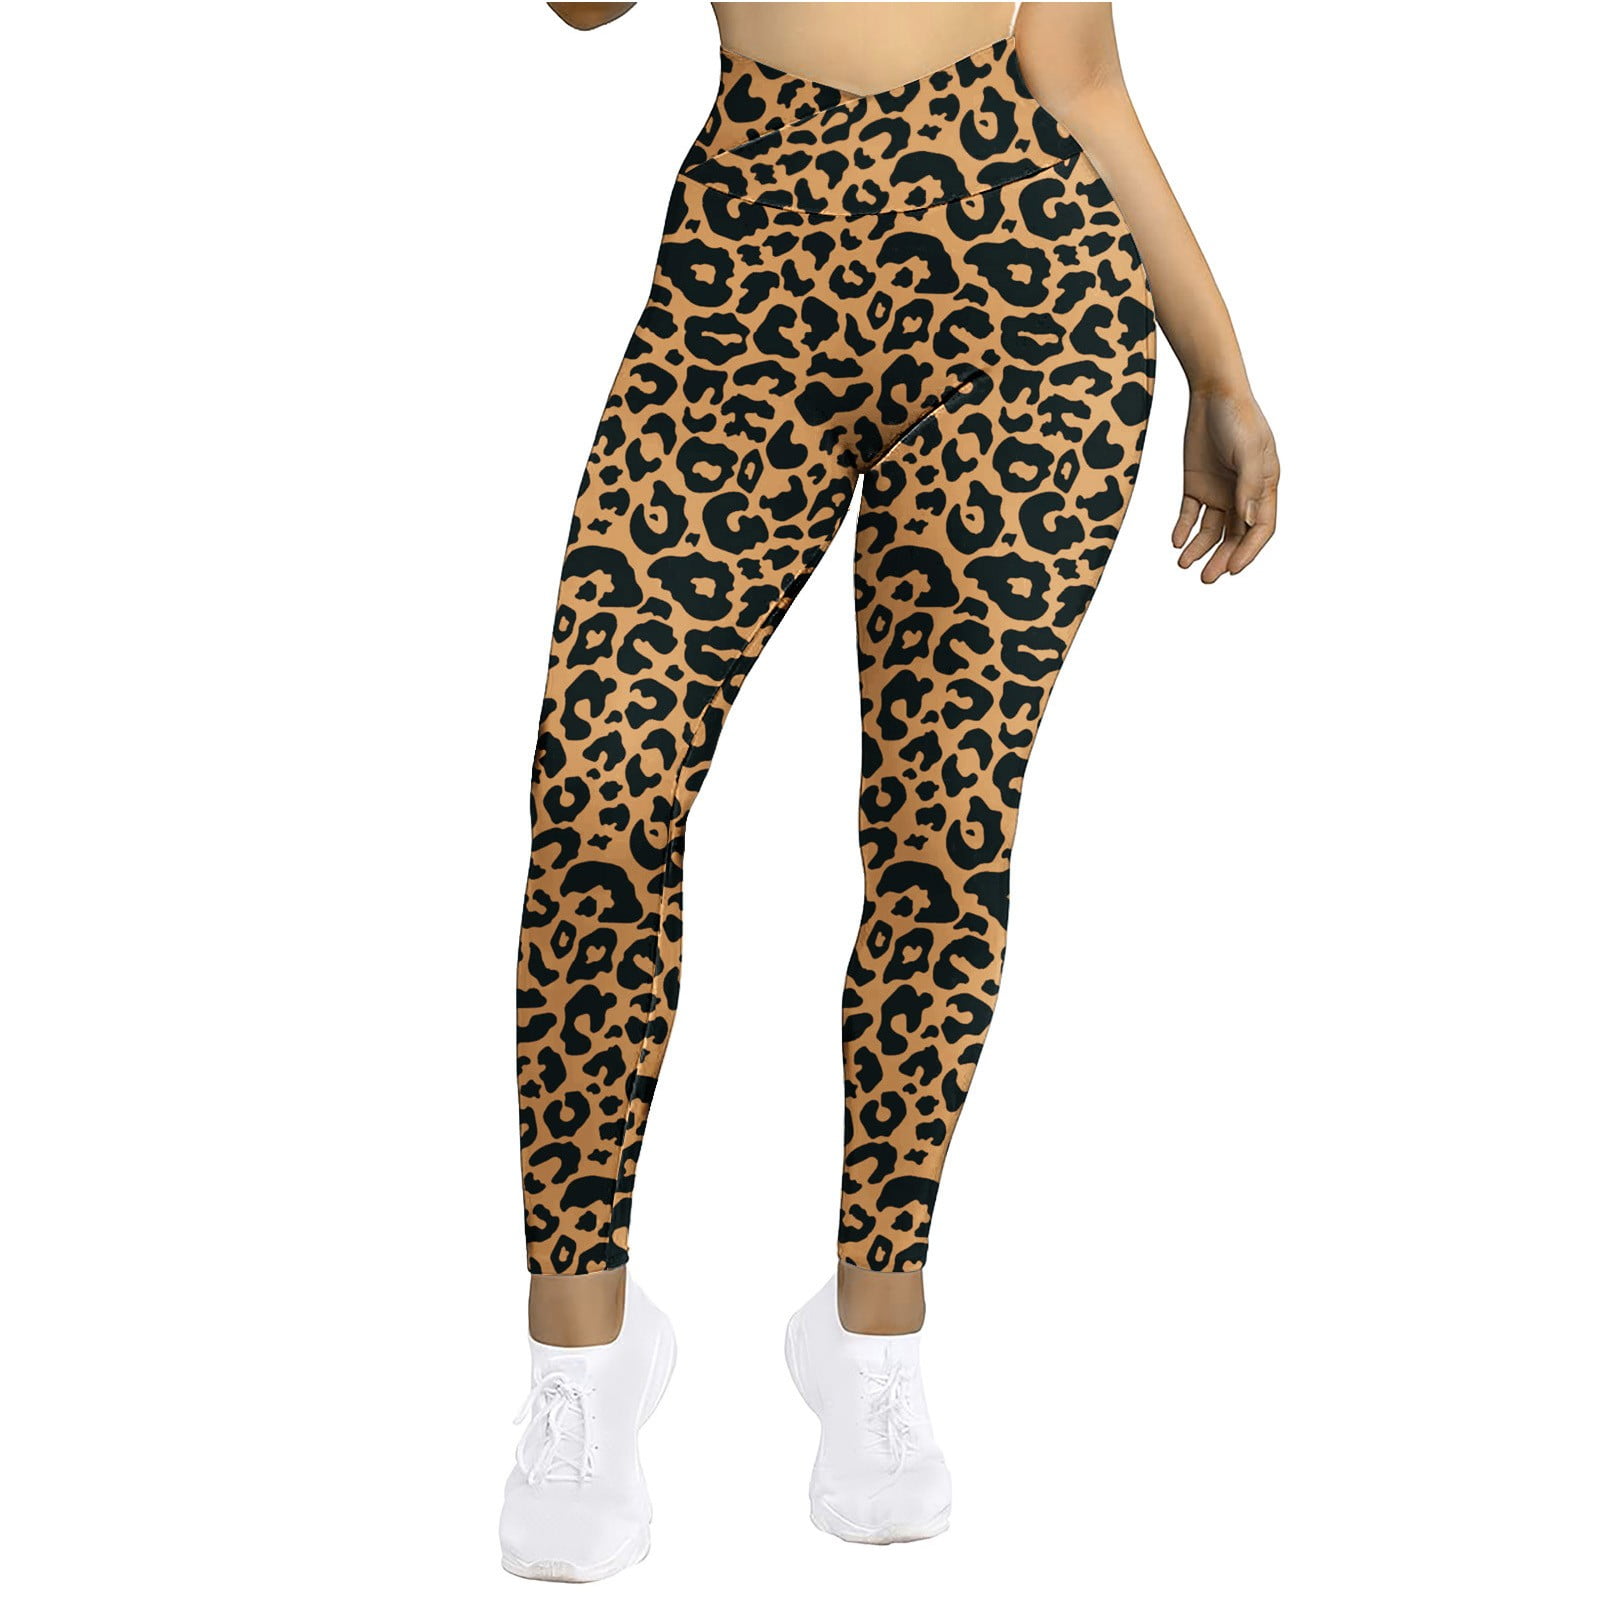 Womens Workout Yoga Leopard Skin Leggings with Pockets | Gearbunch.com